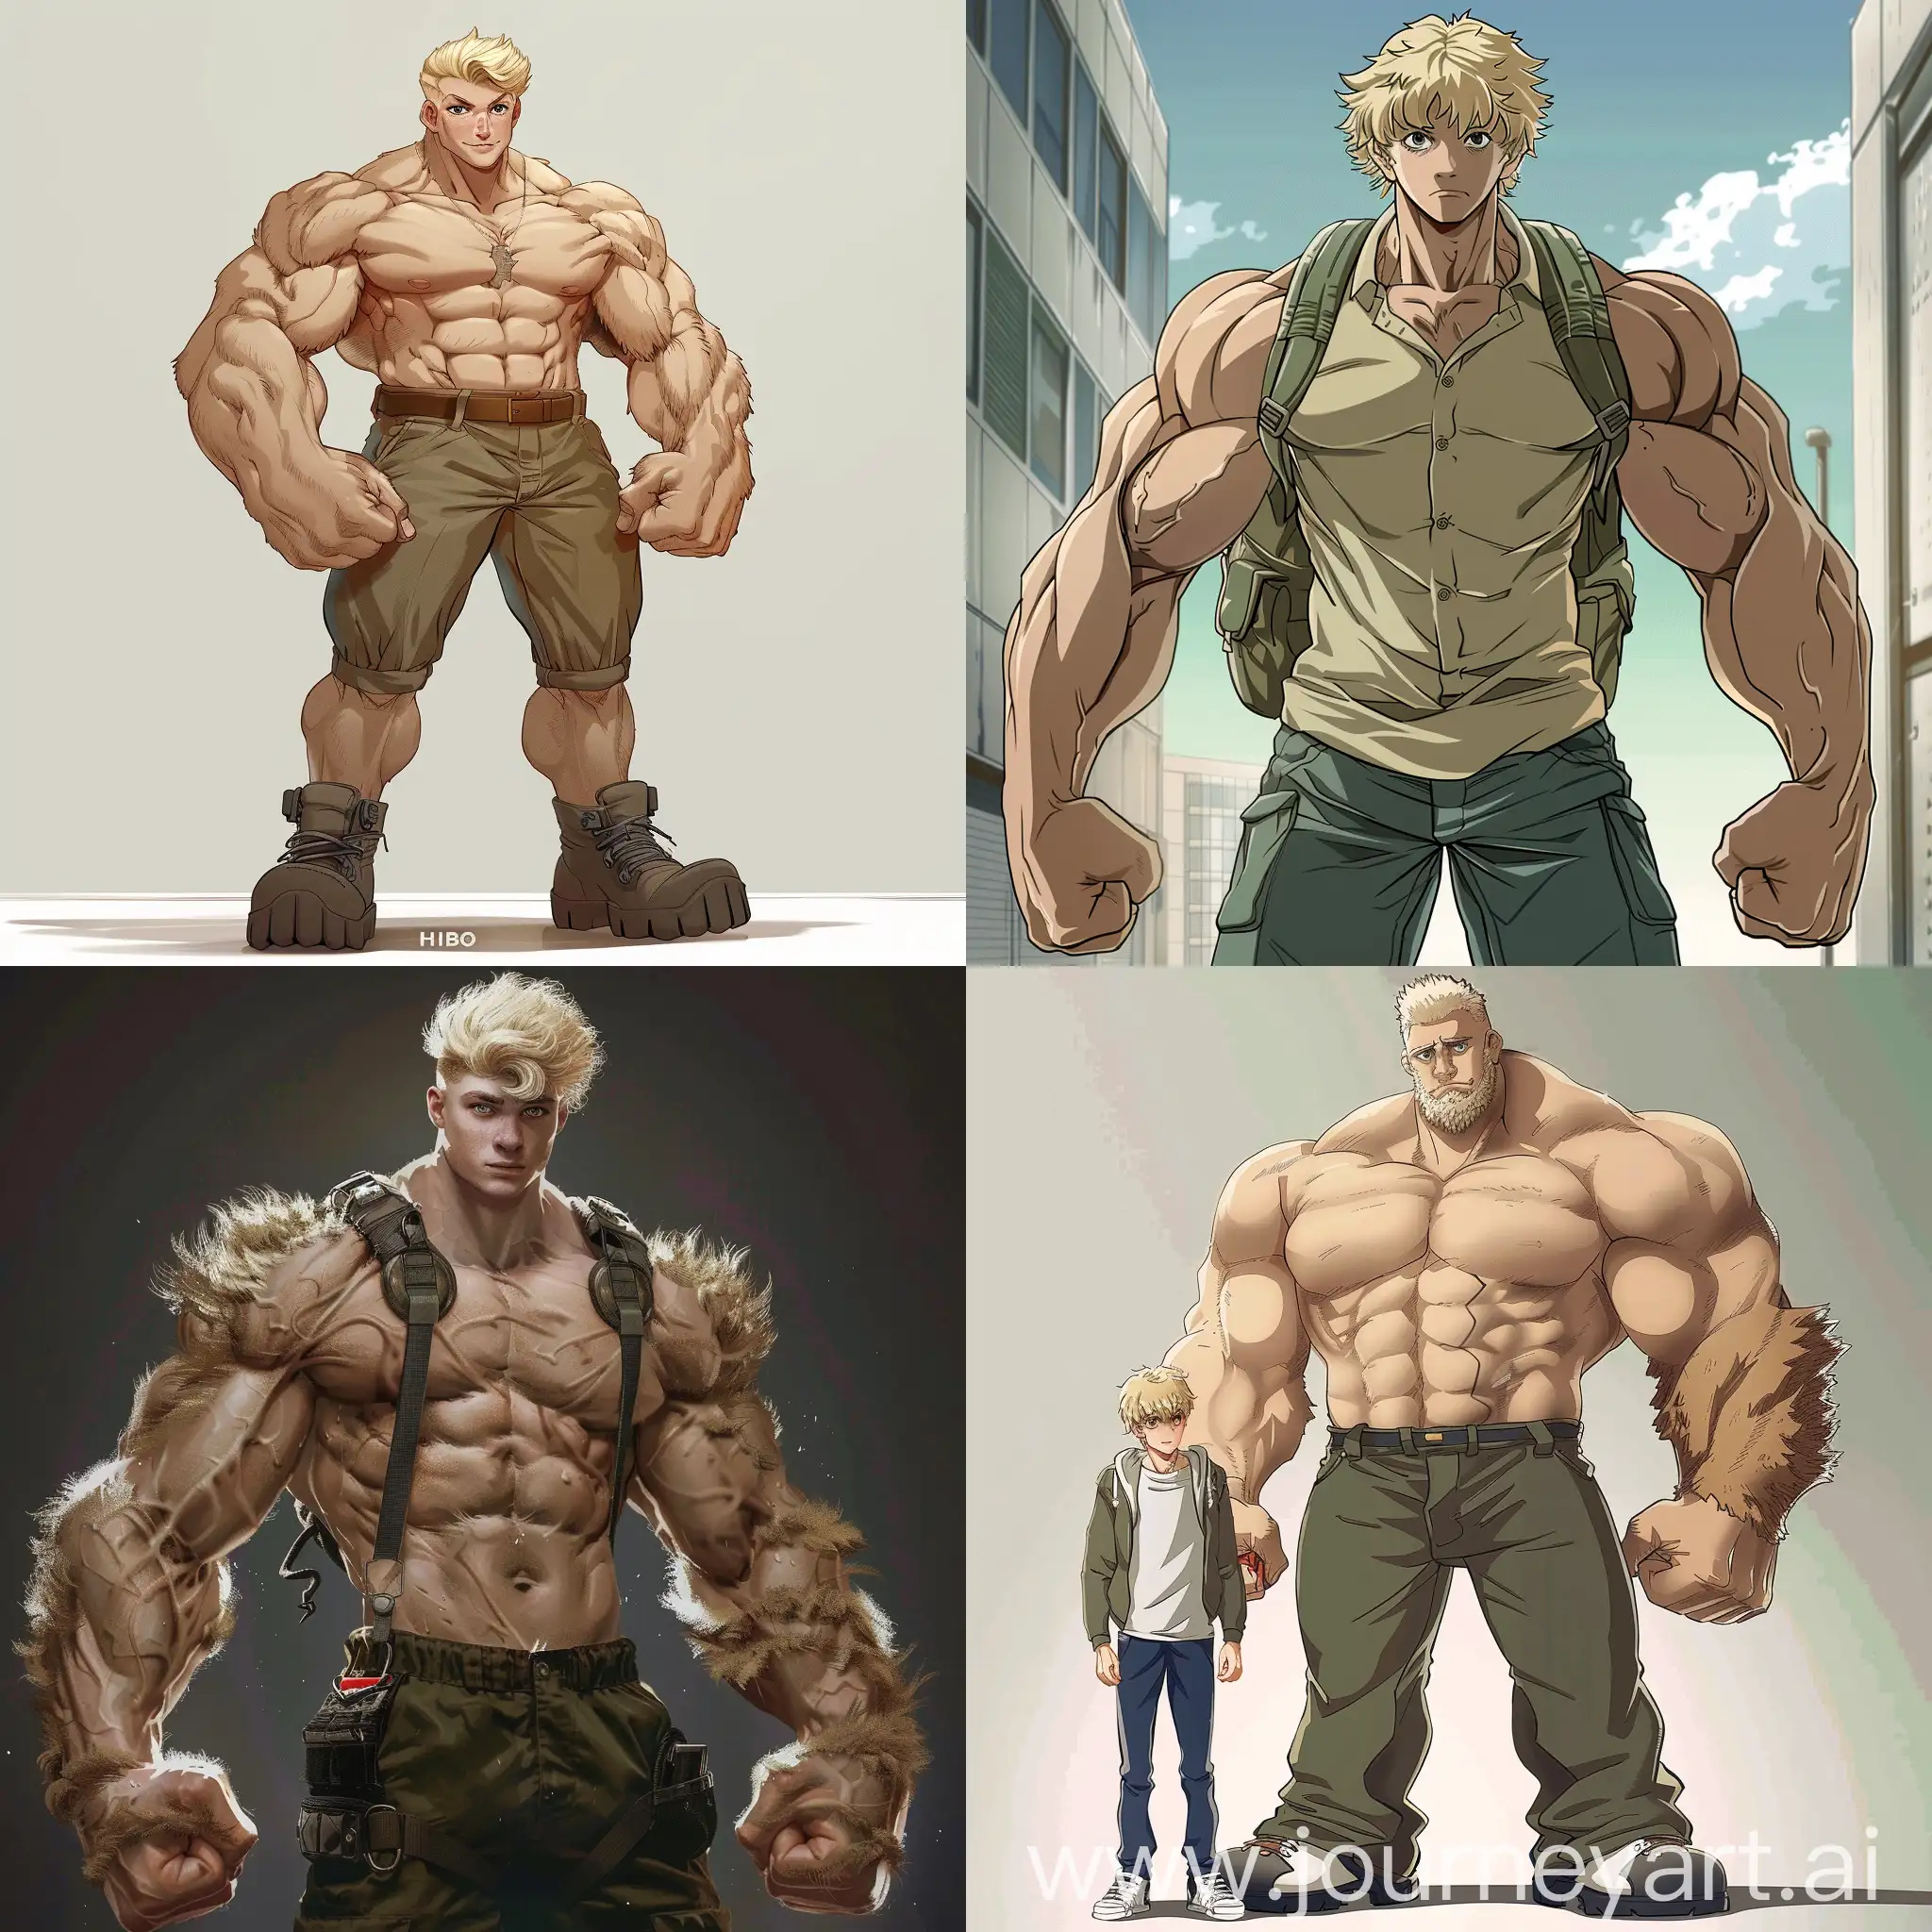 A thin blond nerdy college freshman that turns into a massive muscular hairy himbo